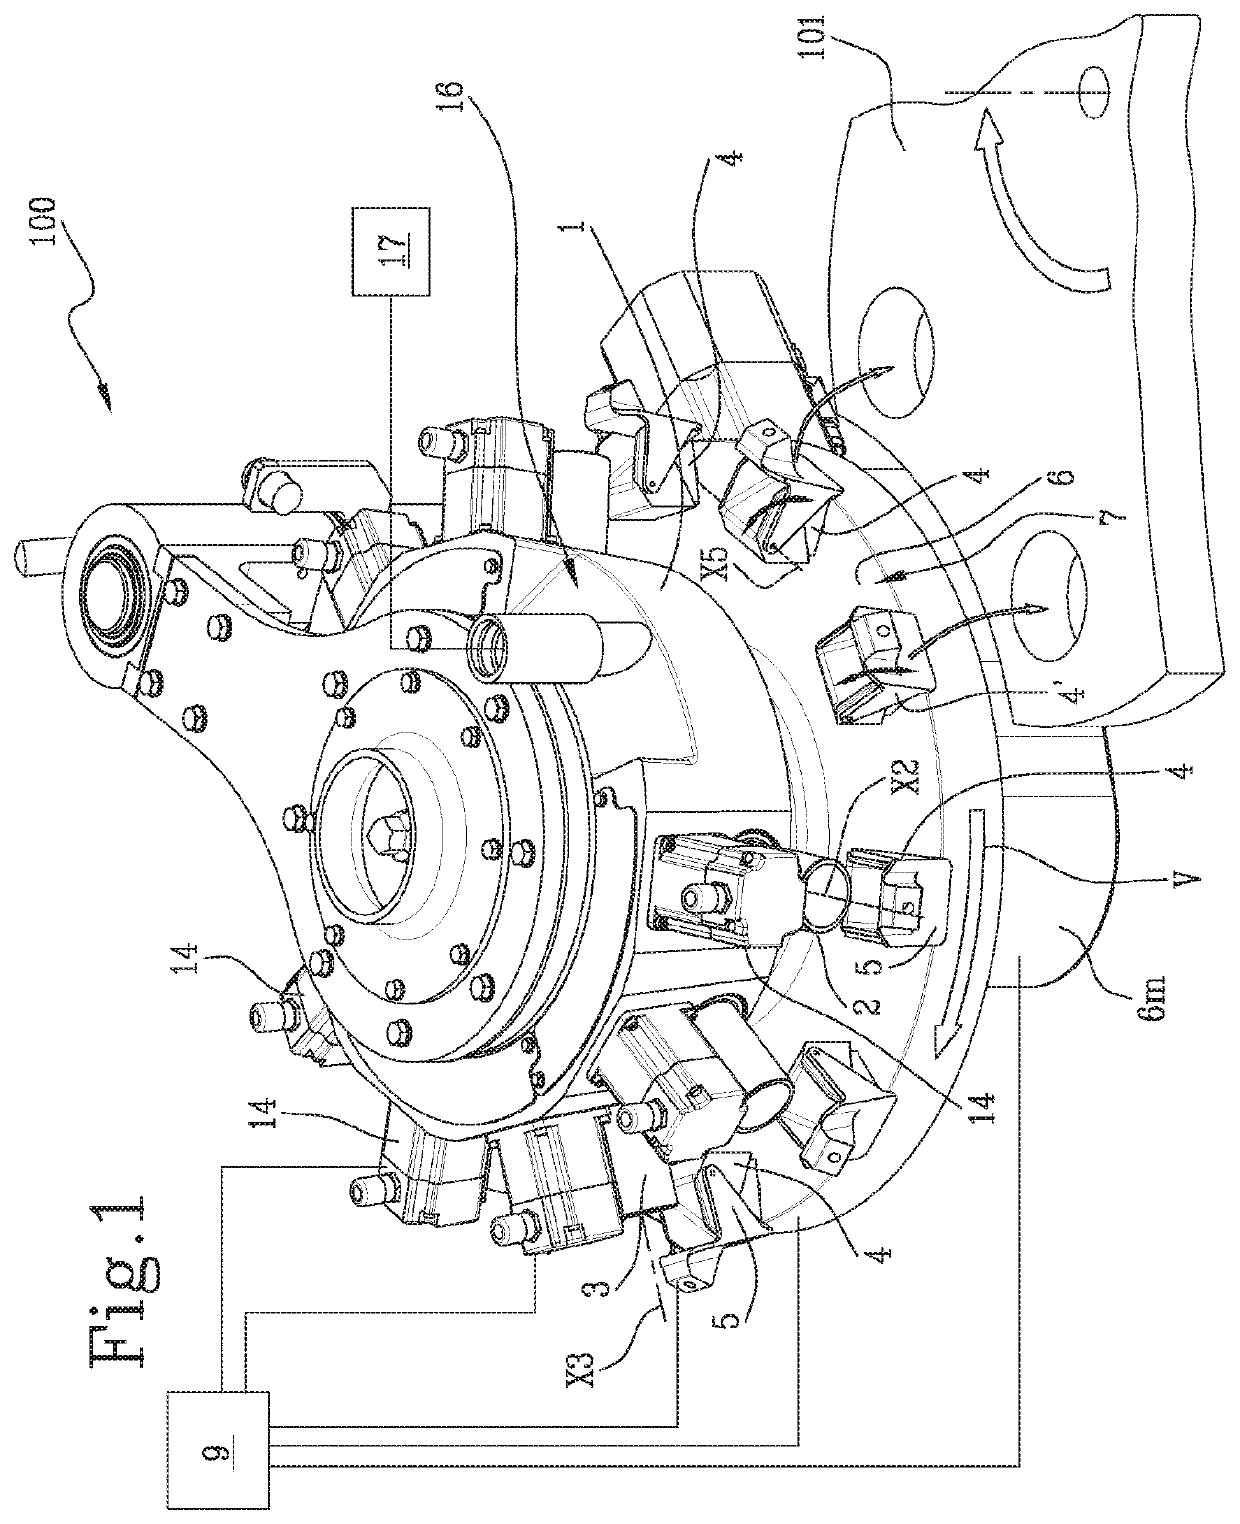 Dosing device for feeding an infusion product